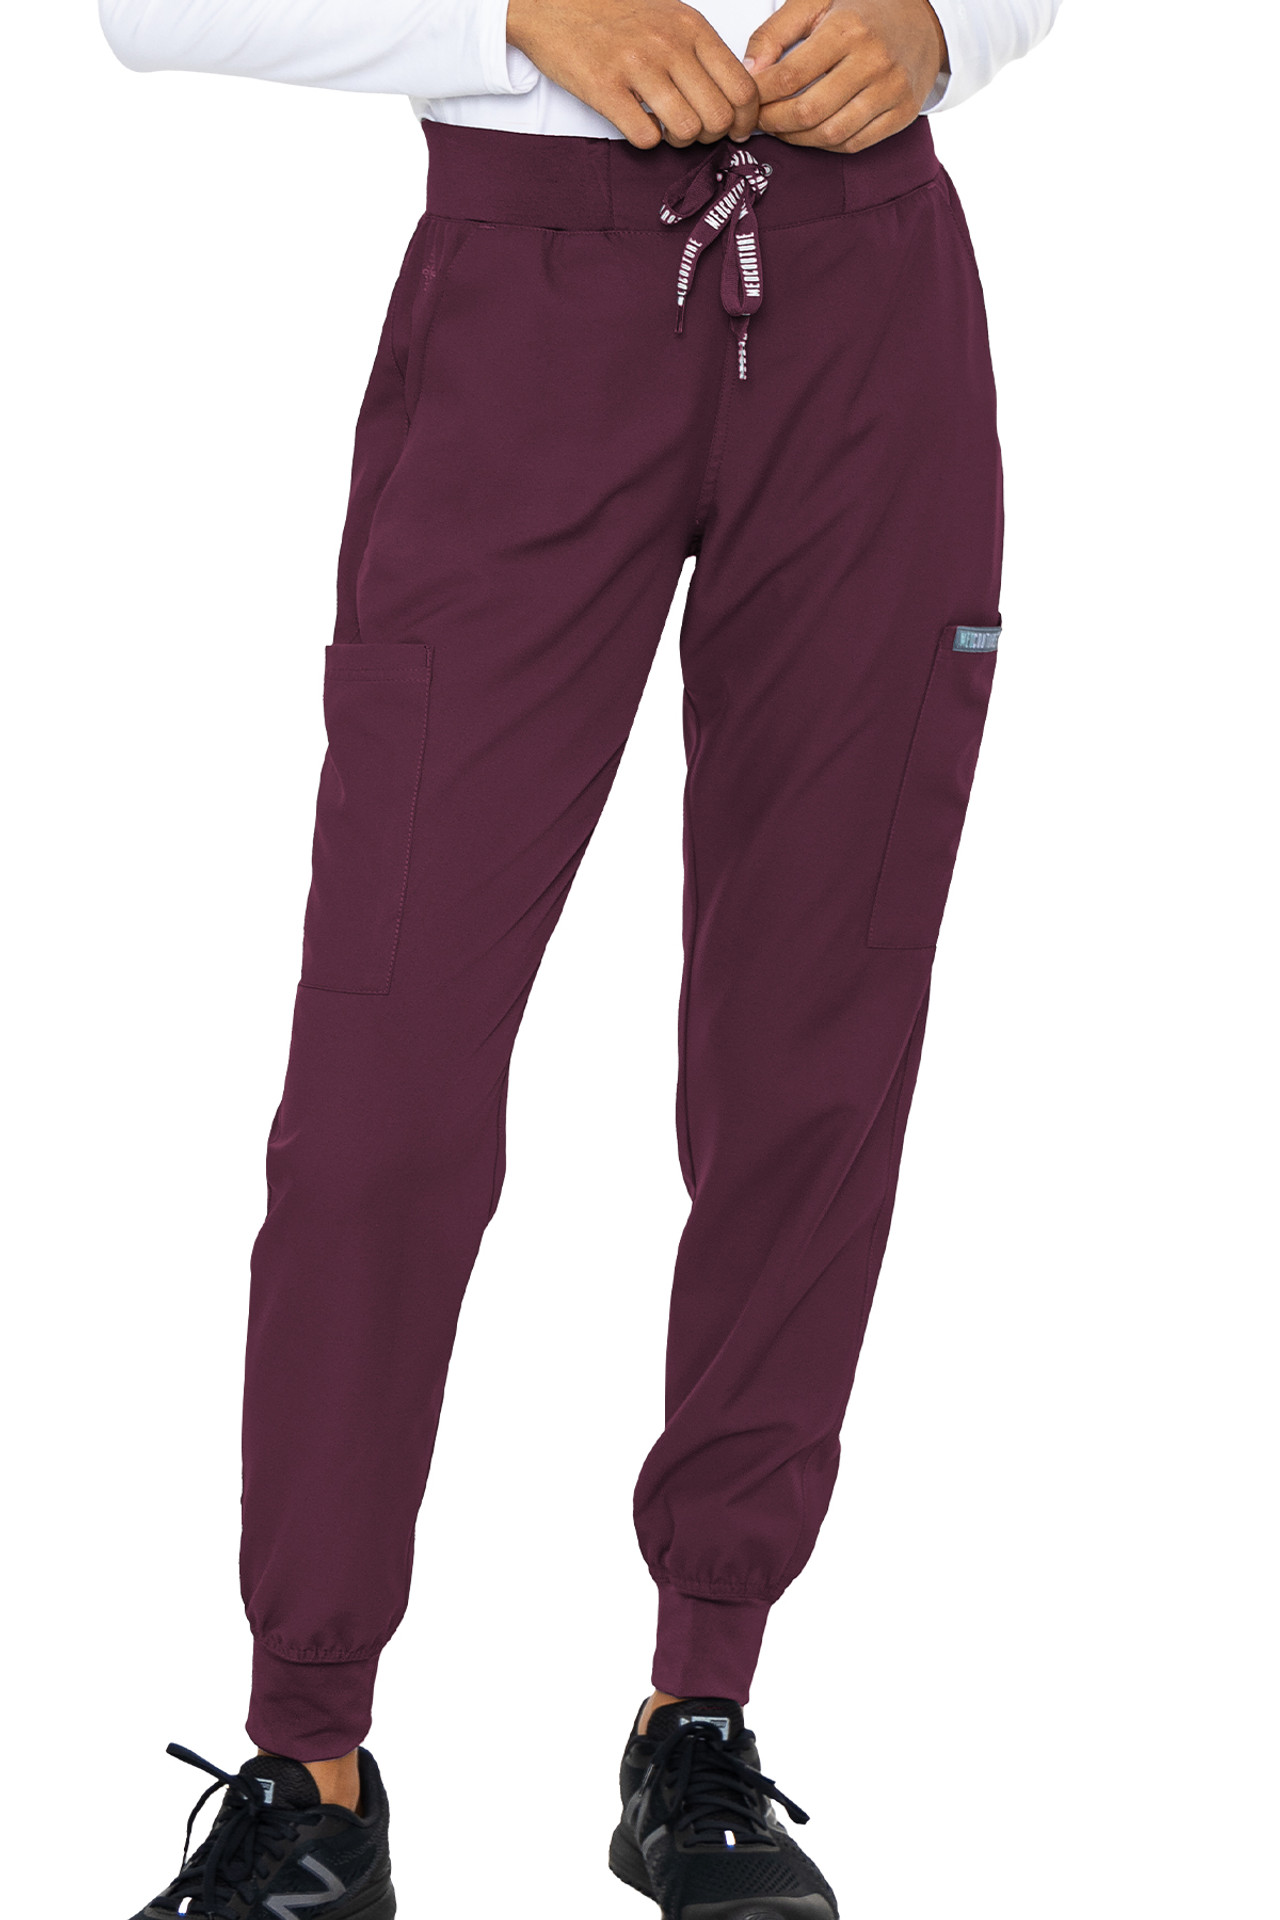 Med Couture Insight Women's Jogger Cargo Scrub Pant